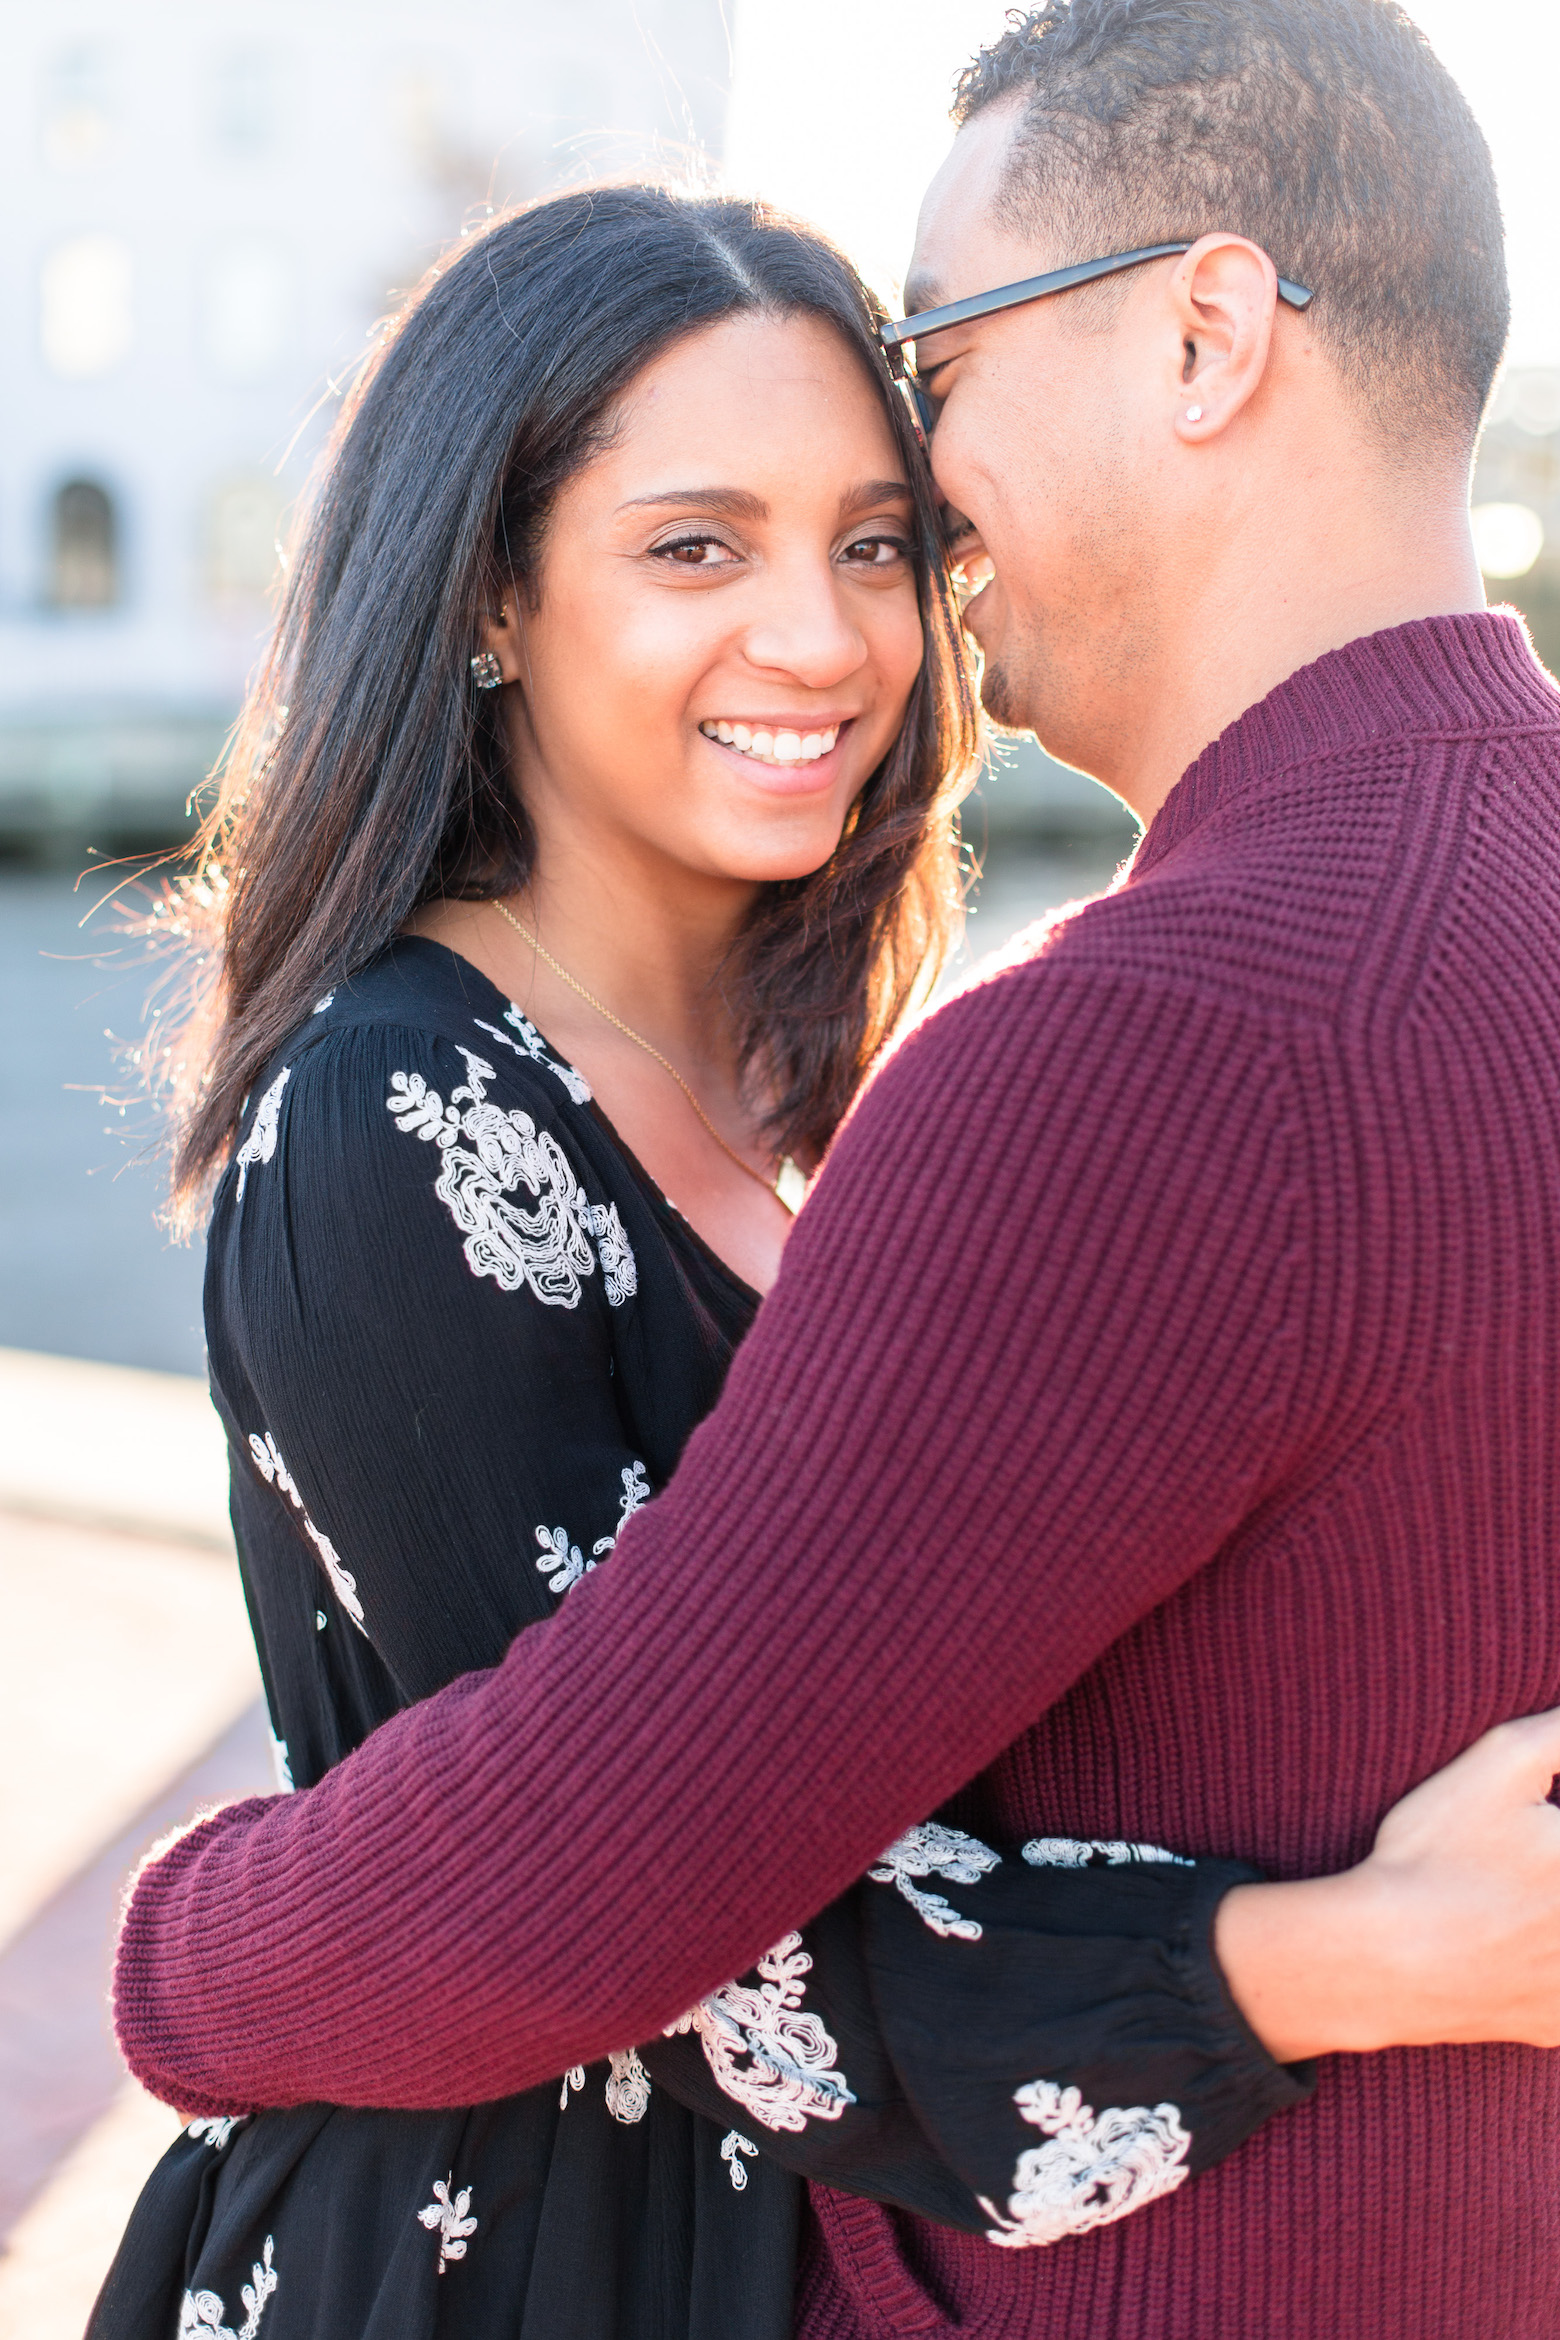 Portsmouth Engagement Photography by Angie McPherson Photography